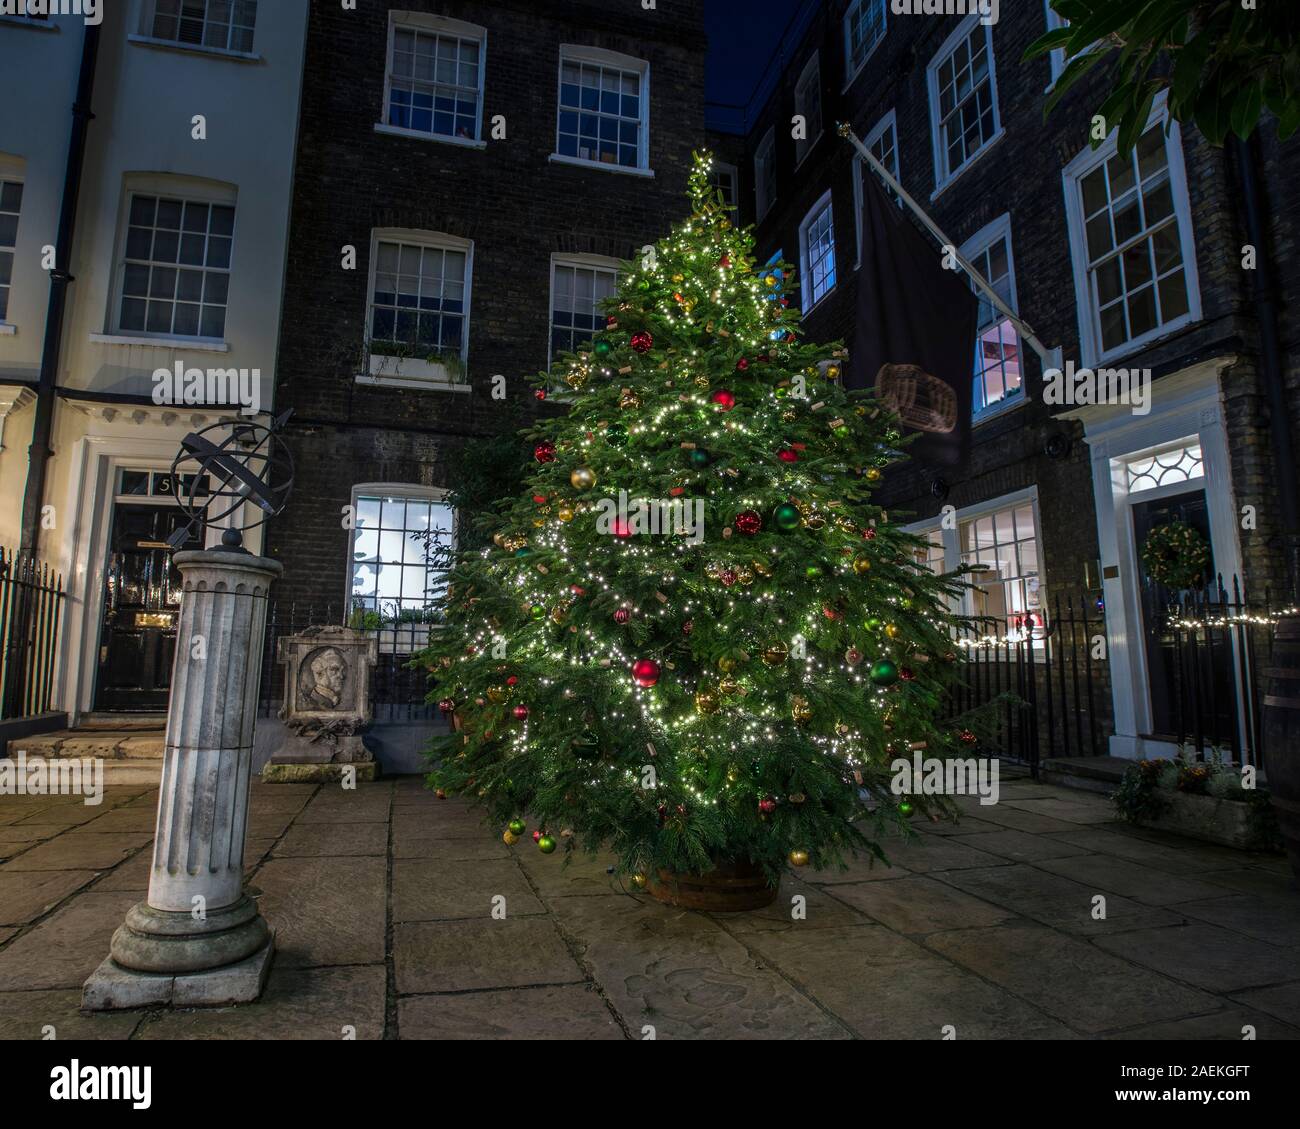 London, UK - December 9th 2019: A beautiful Christmas Tree on display in Pickering Place in London, UK.  Pickering Place is the smallest square in Lon Stock Photo